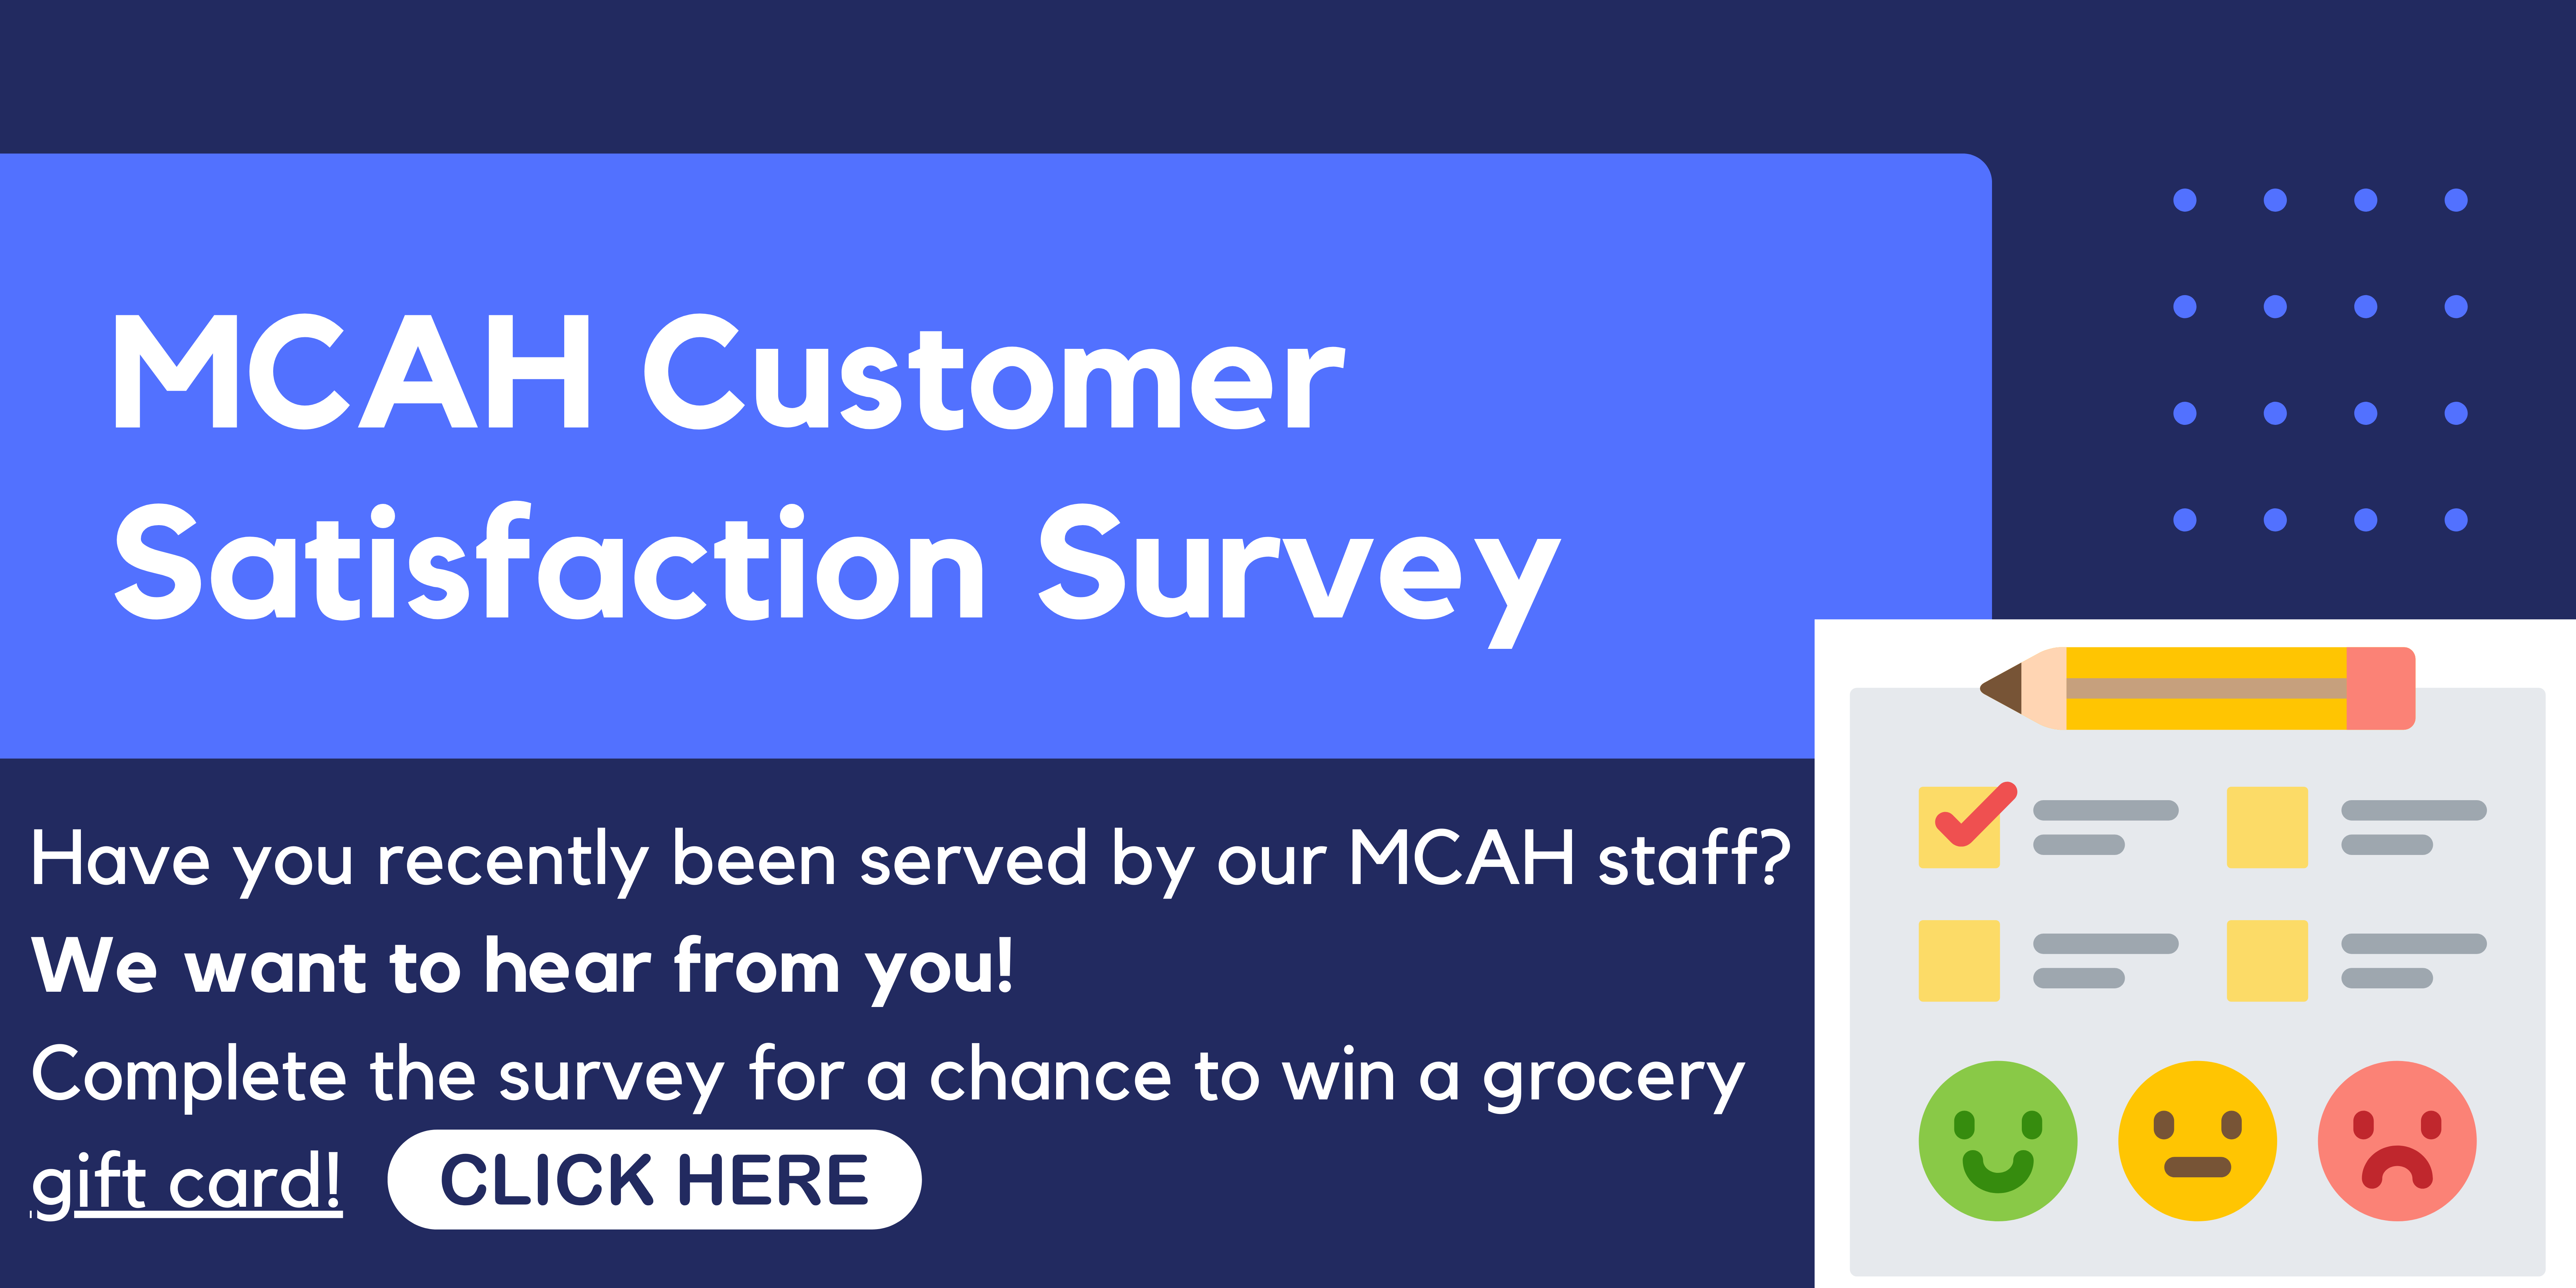 MCAH Customer Satisfaction Survey. Have you recently been served by our MCAH staff? We want to hear from you! Complete the survey for a chance to win a grocery gift card